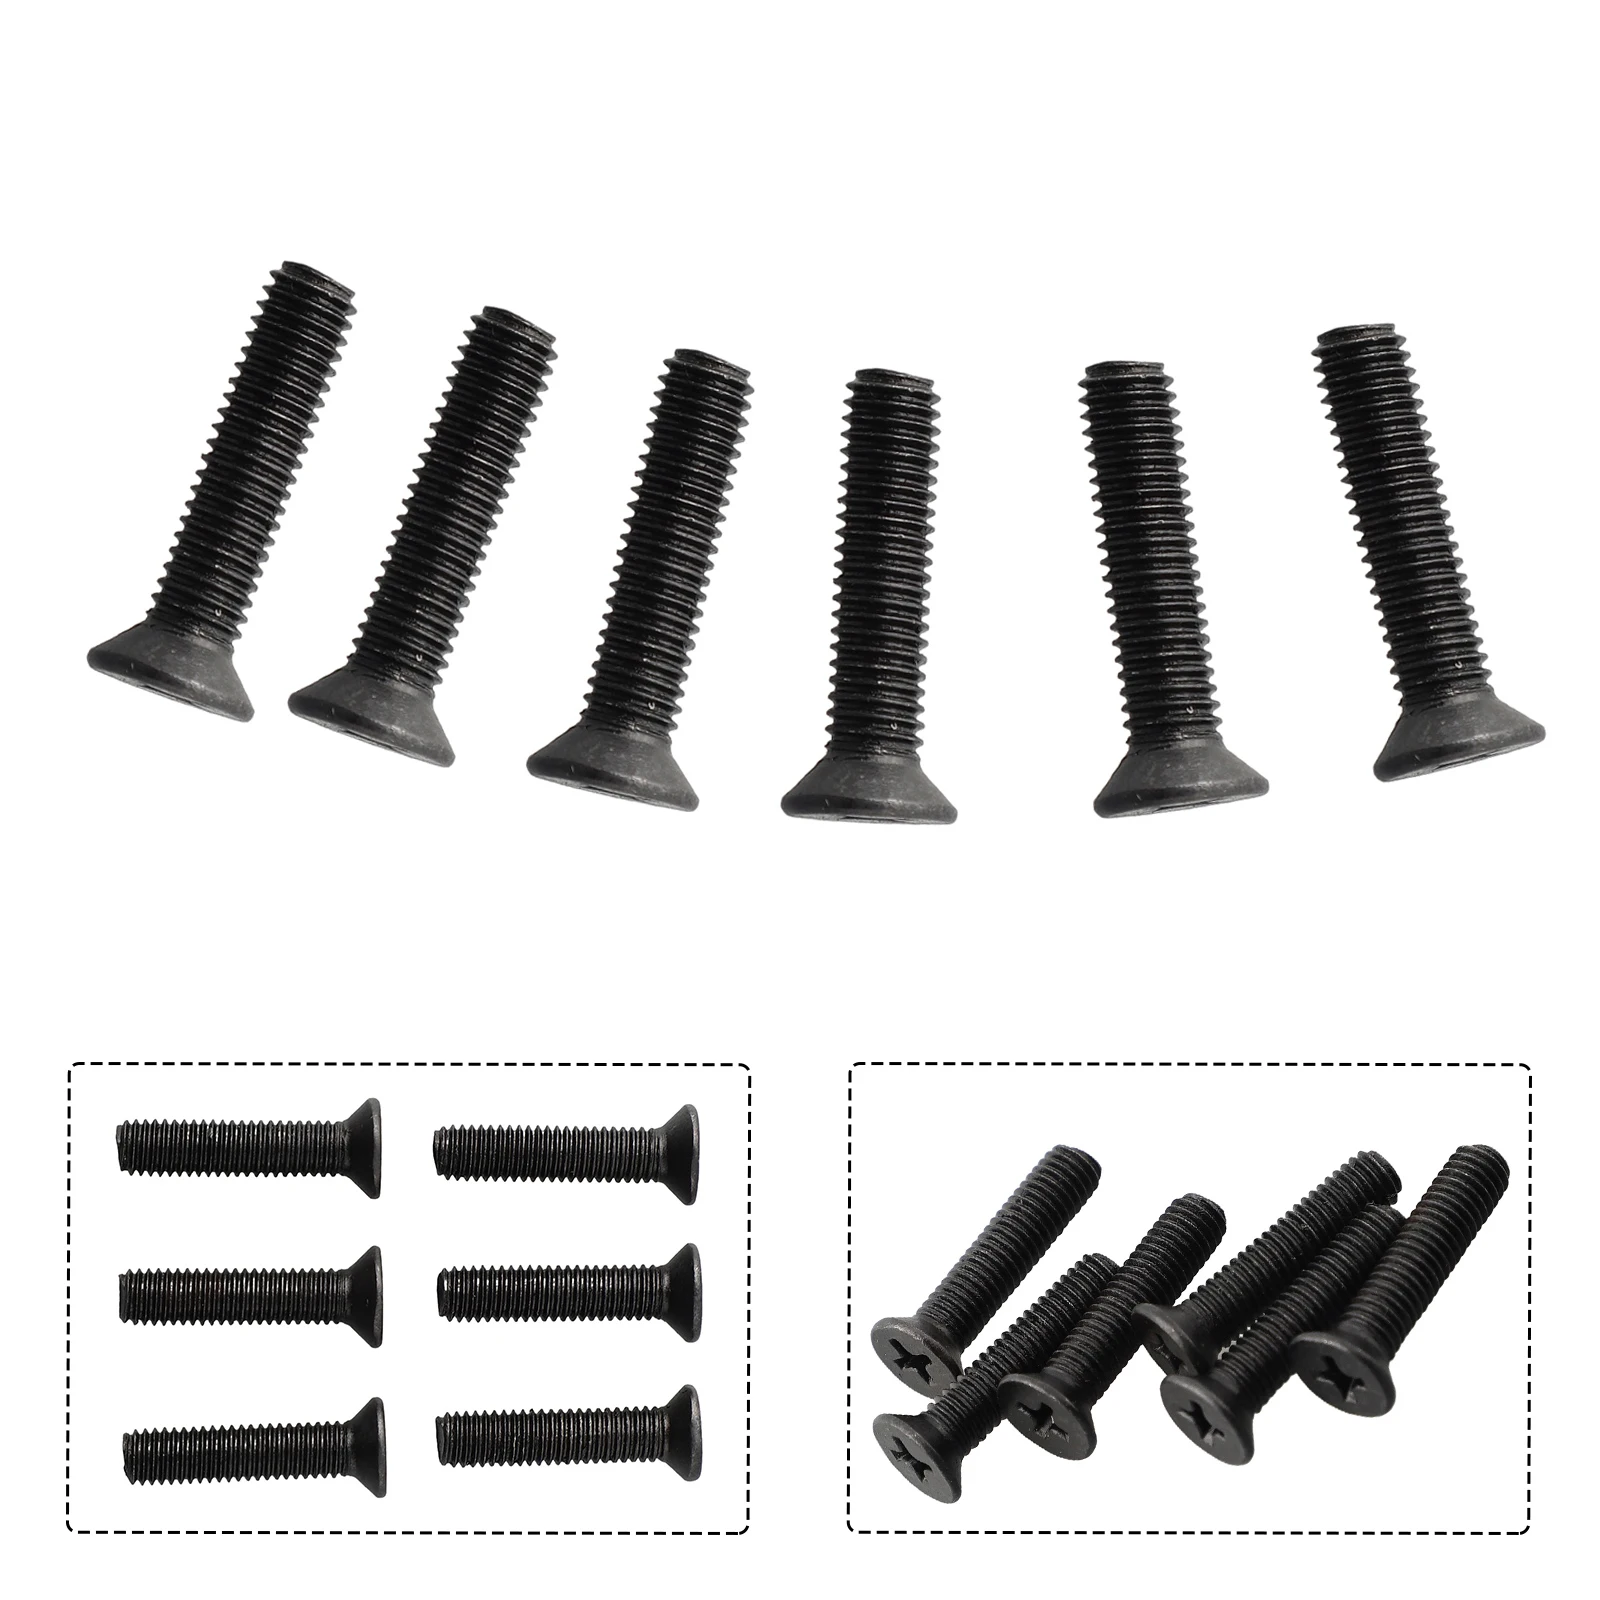 6Pcs M5/M6 22mm Fixing Screw Left Hand Thread For UNF Drill Chuck Shank Adapter Screw Repair Power Tools Accessories